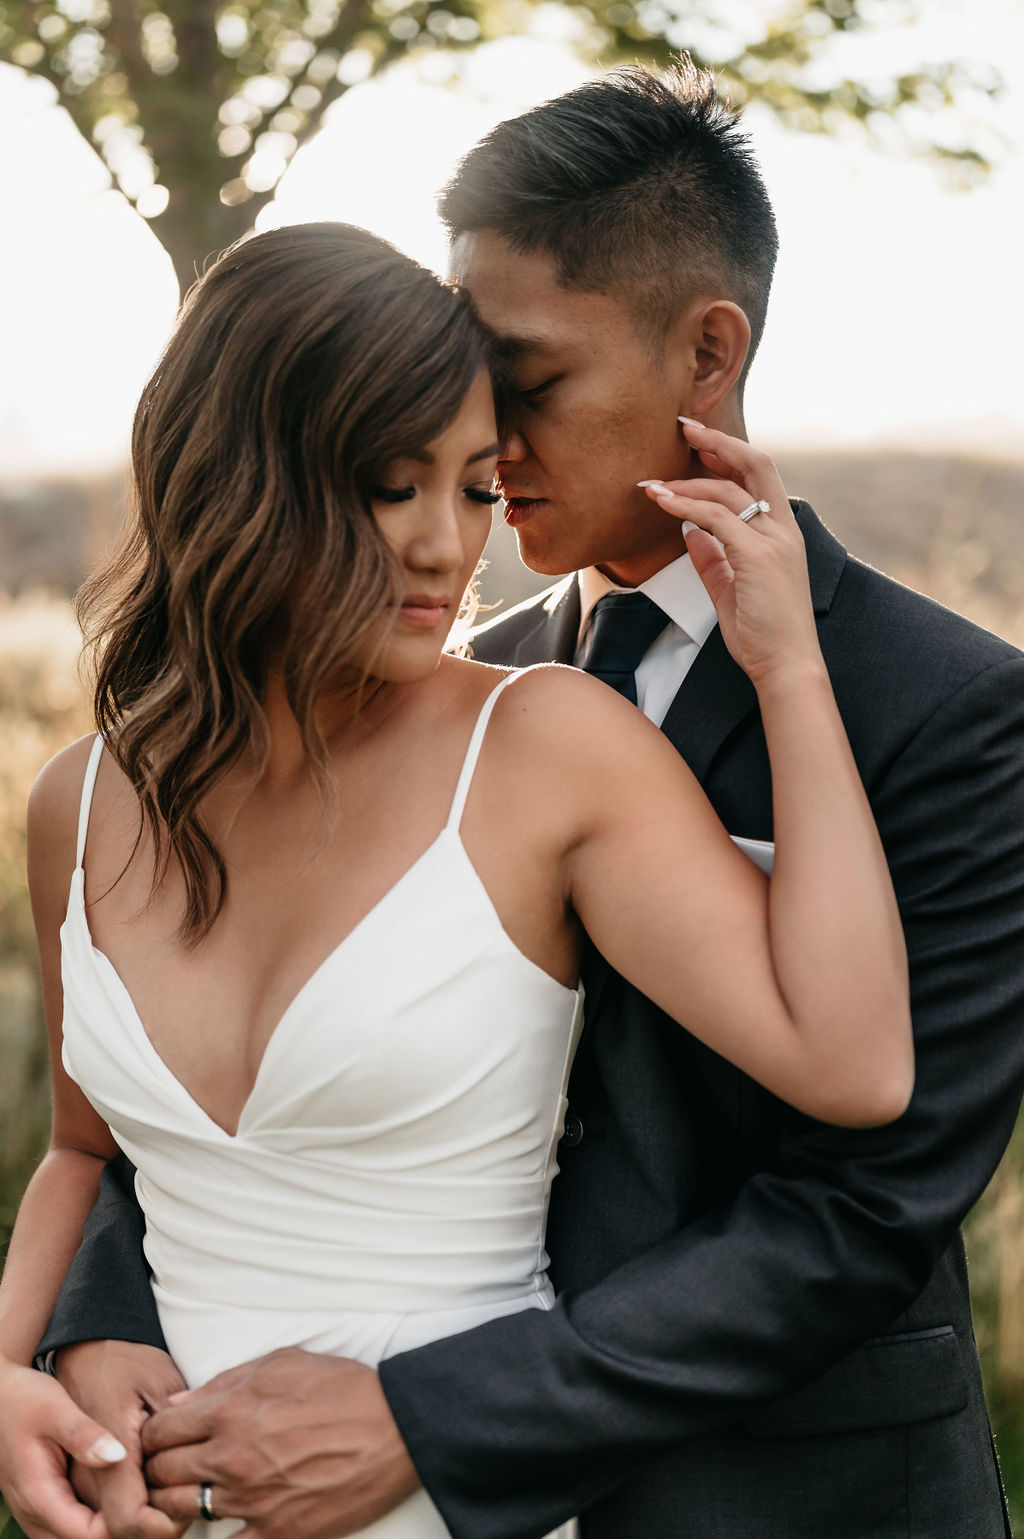 intimate elopement with family and friends, summer wedding inspiration
